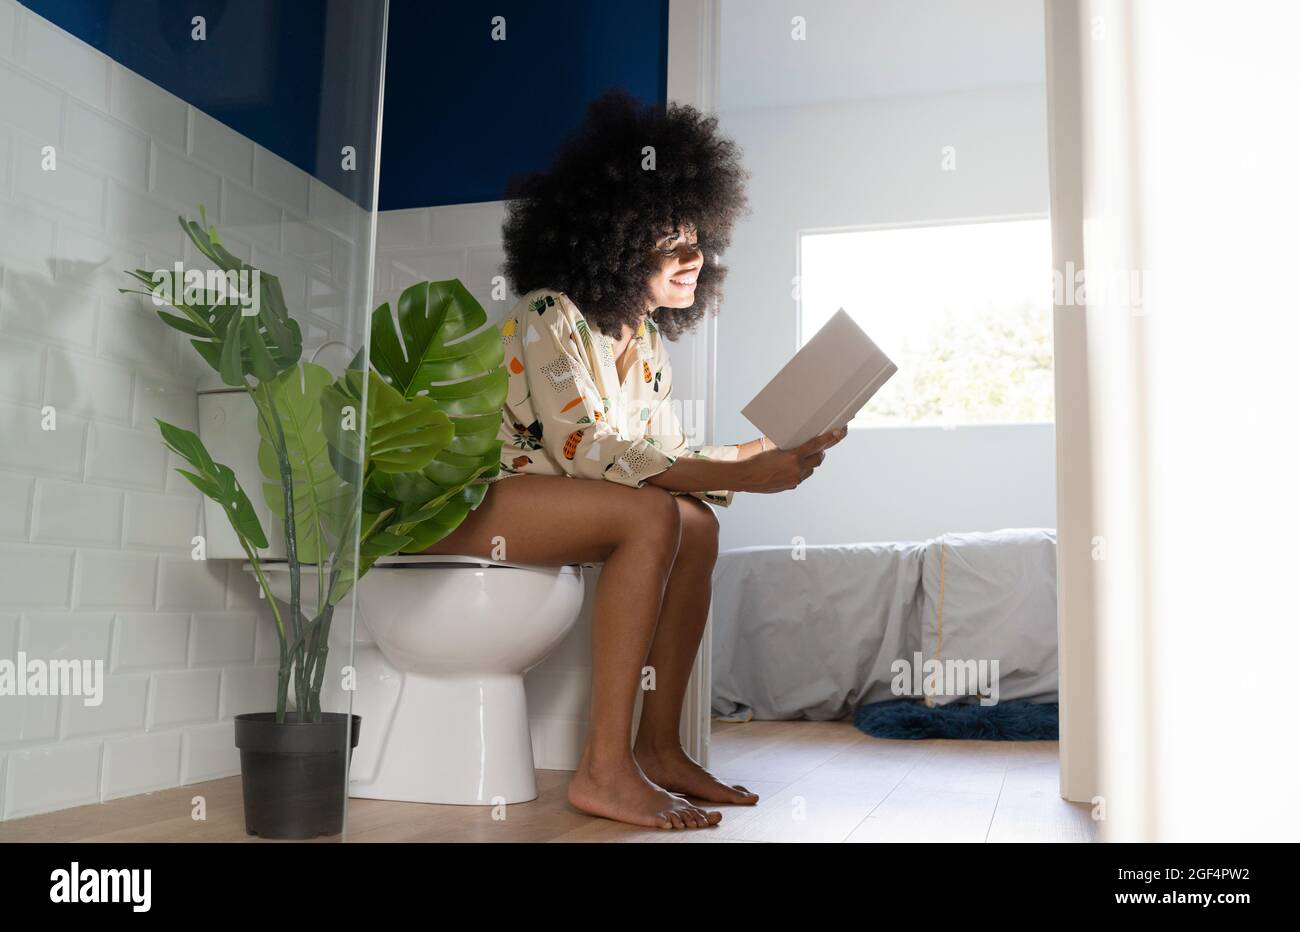 Afro woman reading book near potted plant while sitting on toilet seat at home Stock Photo